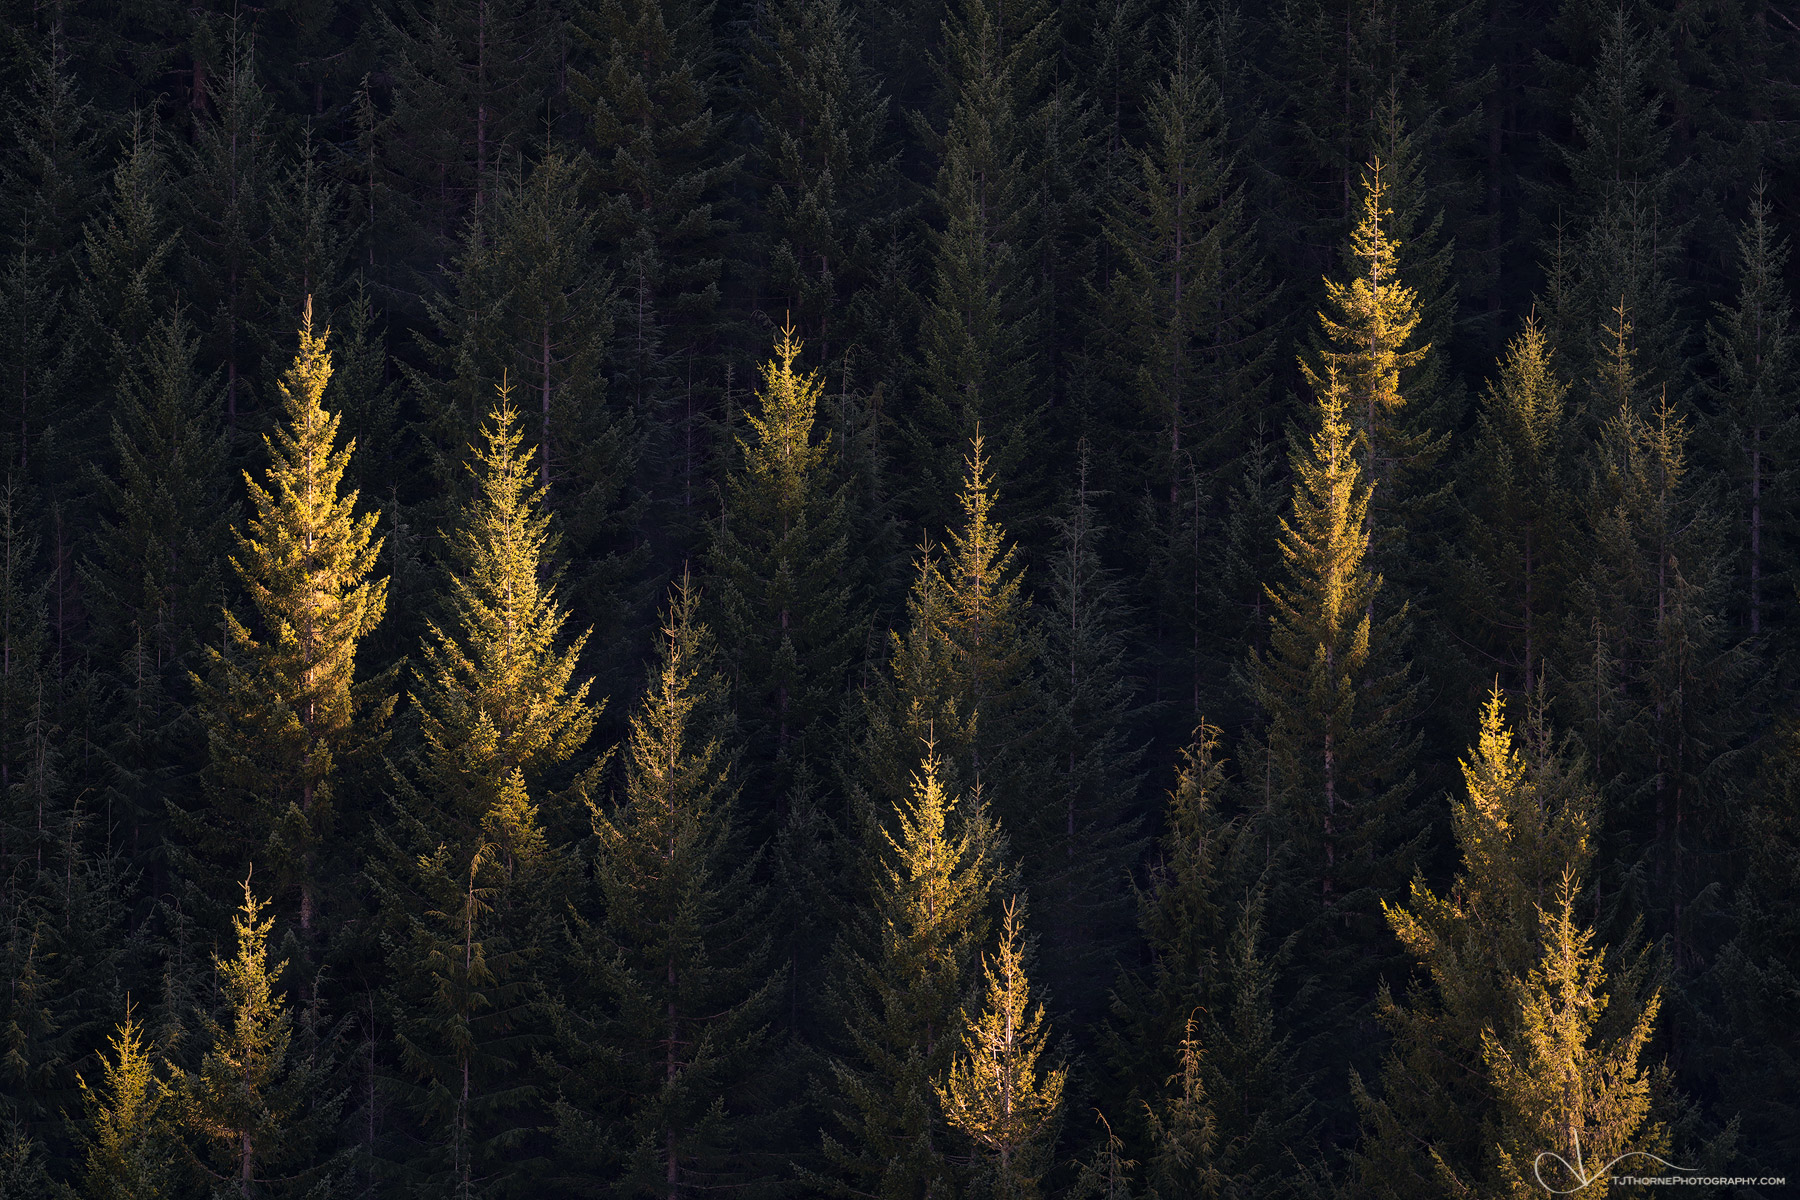 FINE ART LIMITED EDITION OF 100 Evening light illuminates the tips of adolescent douglas fir trees in Mt. Hood National Forest...